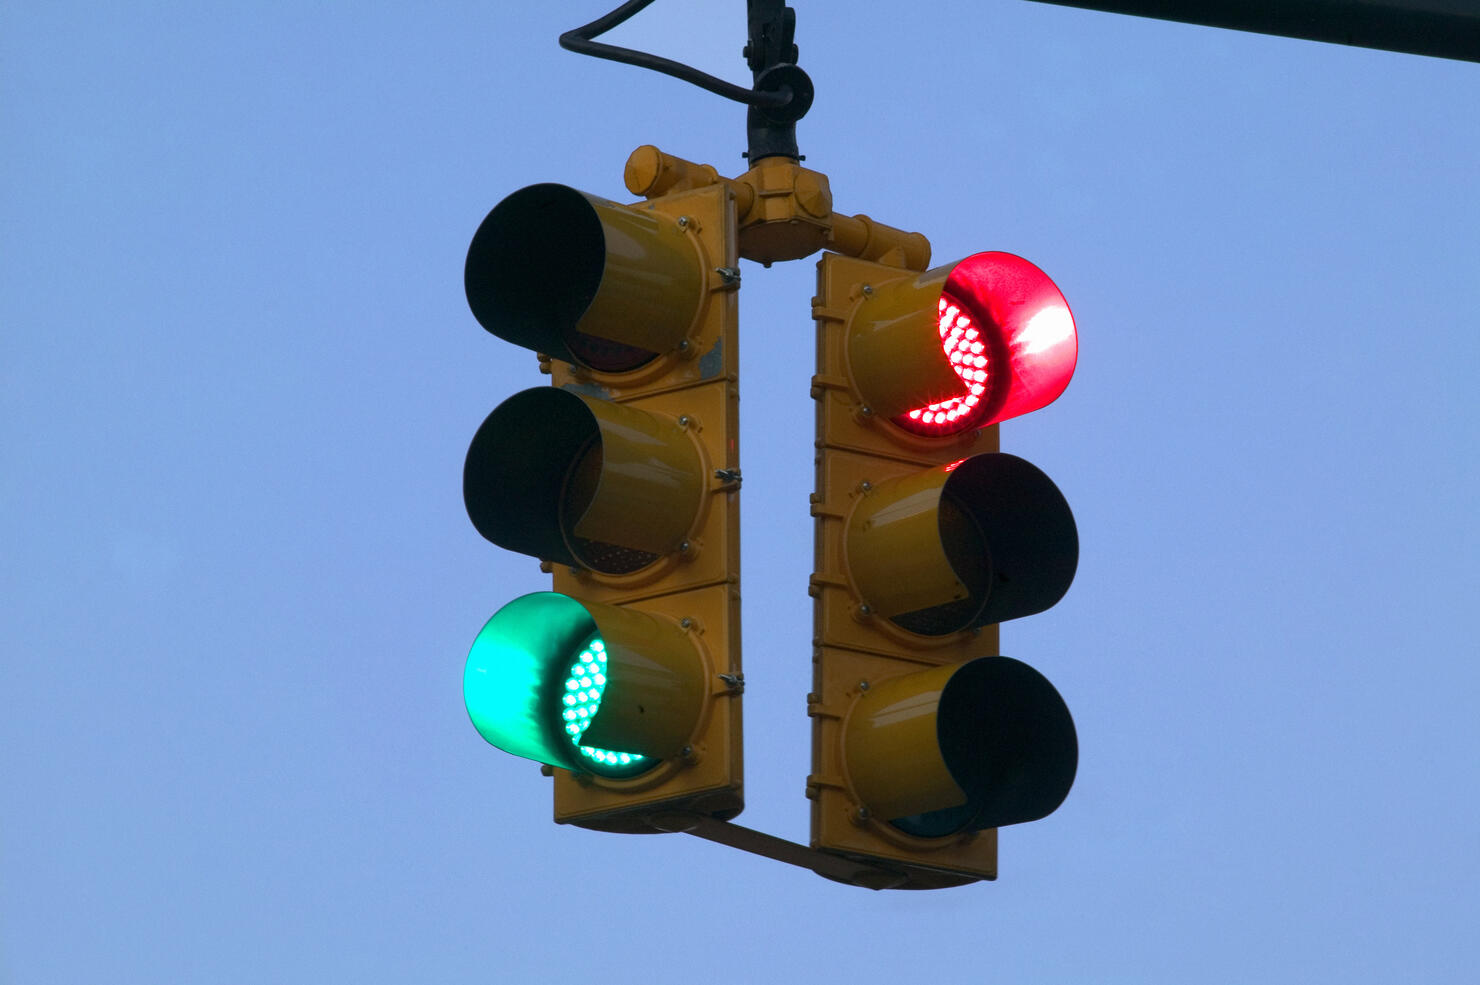 Green and red traffic light